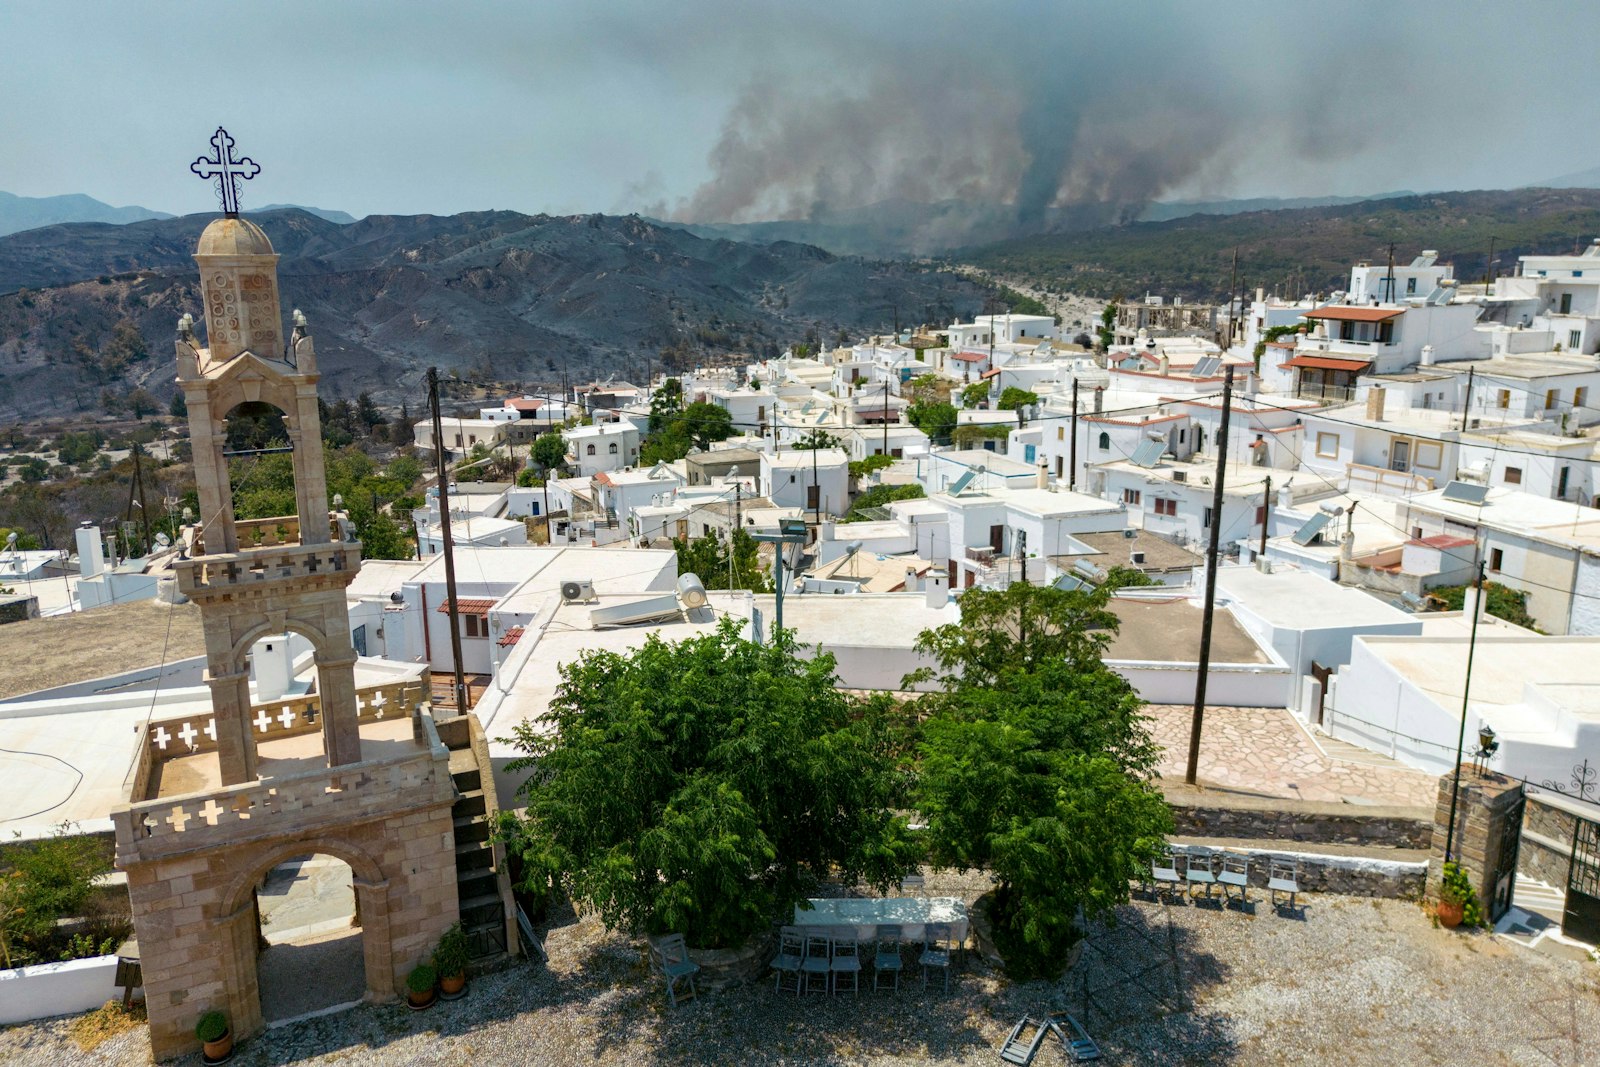 The grounds of the Church of Virgin Mary are seen in village of Asklipieio, as a wildfire burns in the background on the island of Rhodes, Greece, July 26, 2023. Catholics in Greece have called for lessons to be learned after a wave of fires devastated parts of the country amid highest summer temperatures for half a century. (OSV News photo/Nicolas Economou, Reuters)